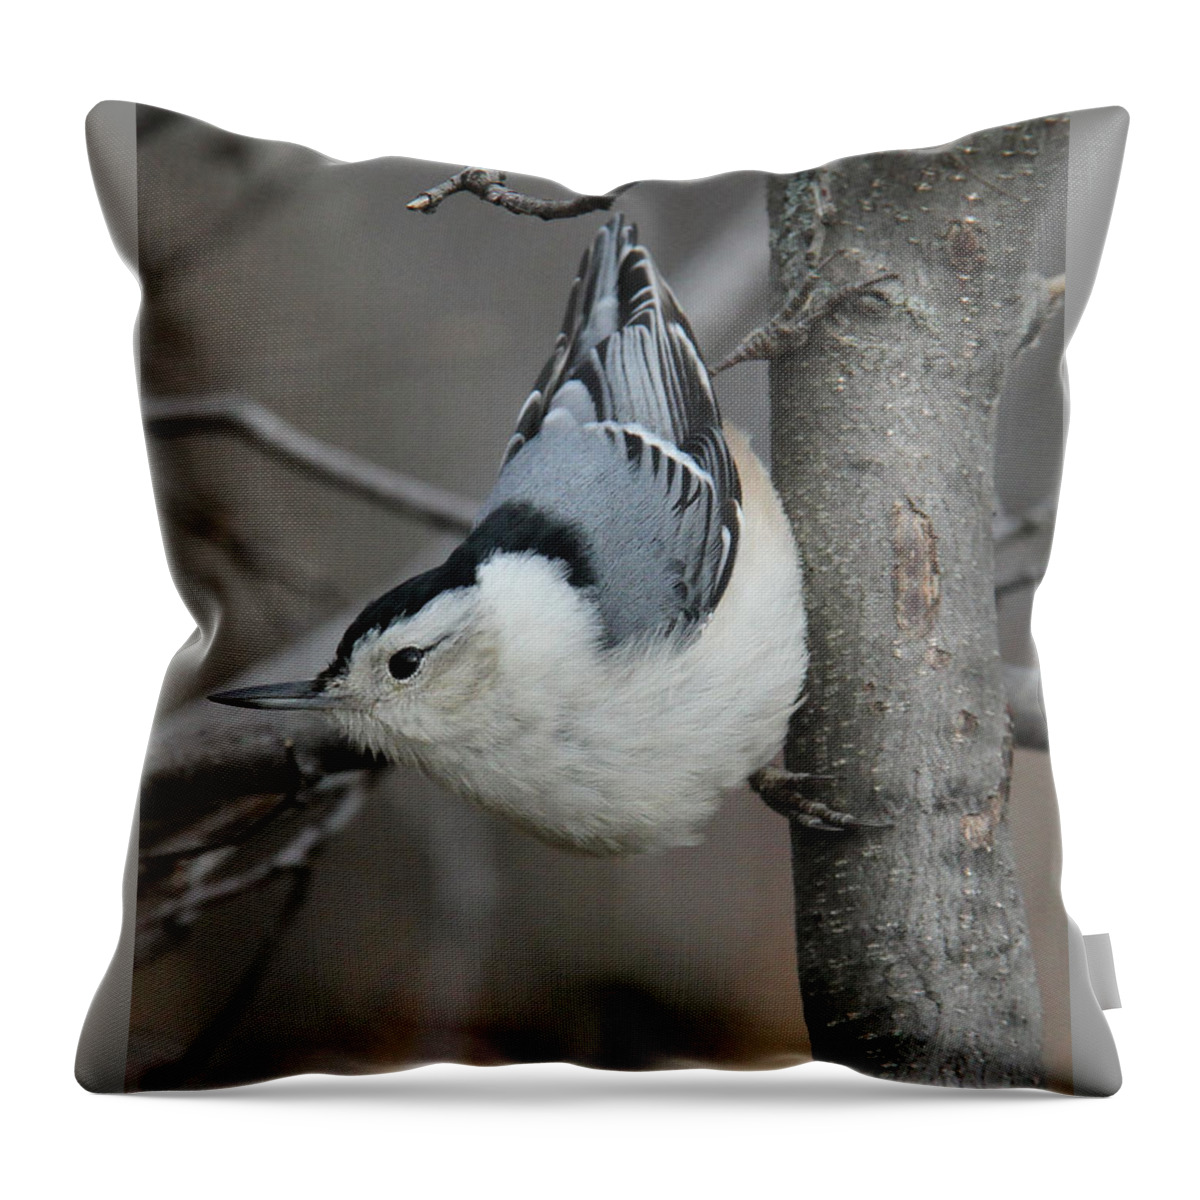 Bird Throw Pillow featuring the photograph Looking For Seeds by Doris Potter